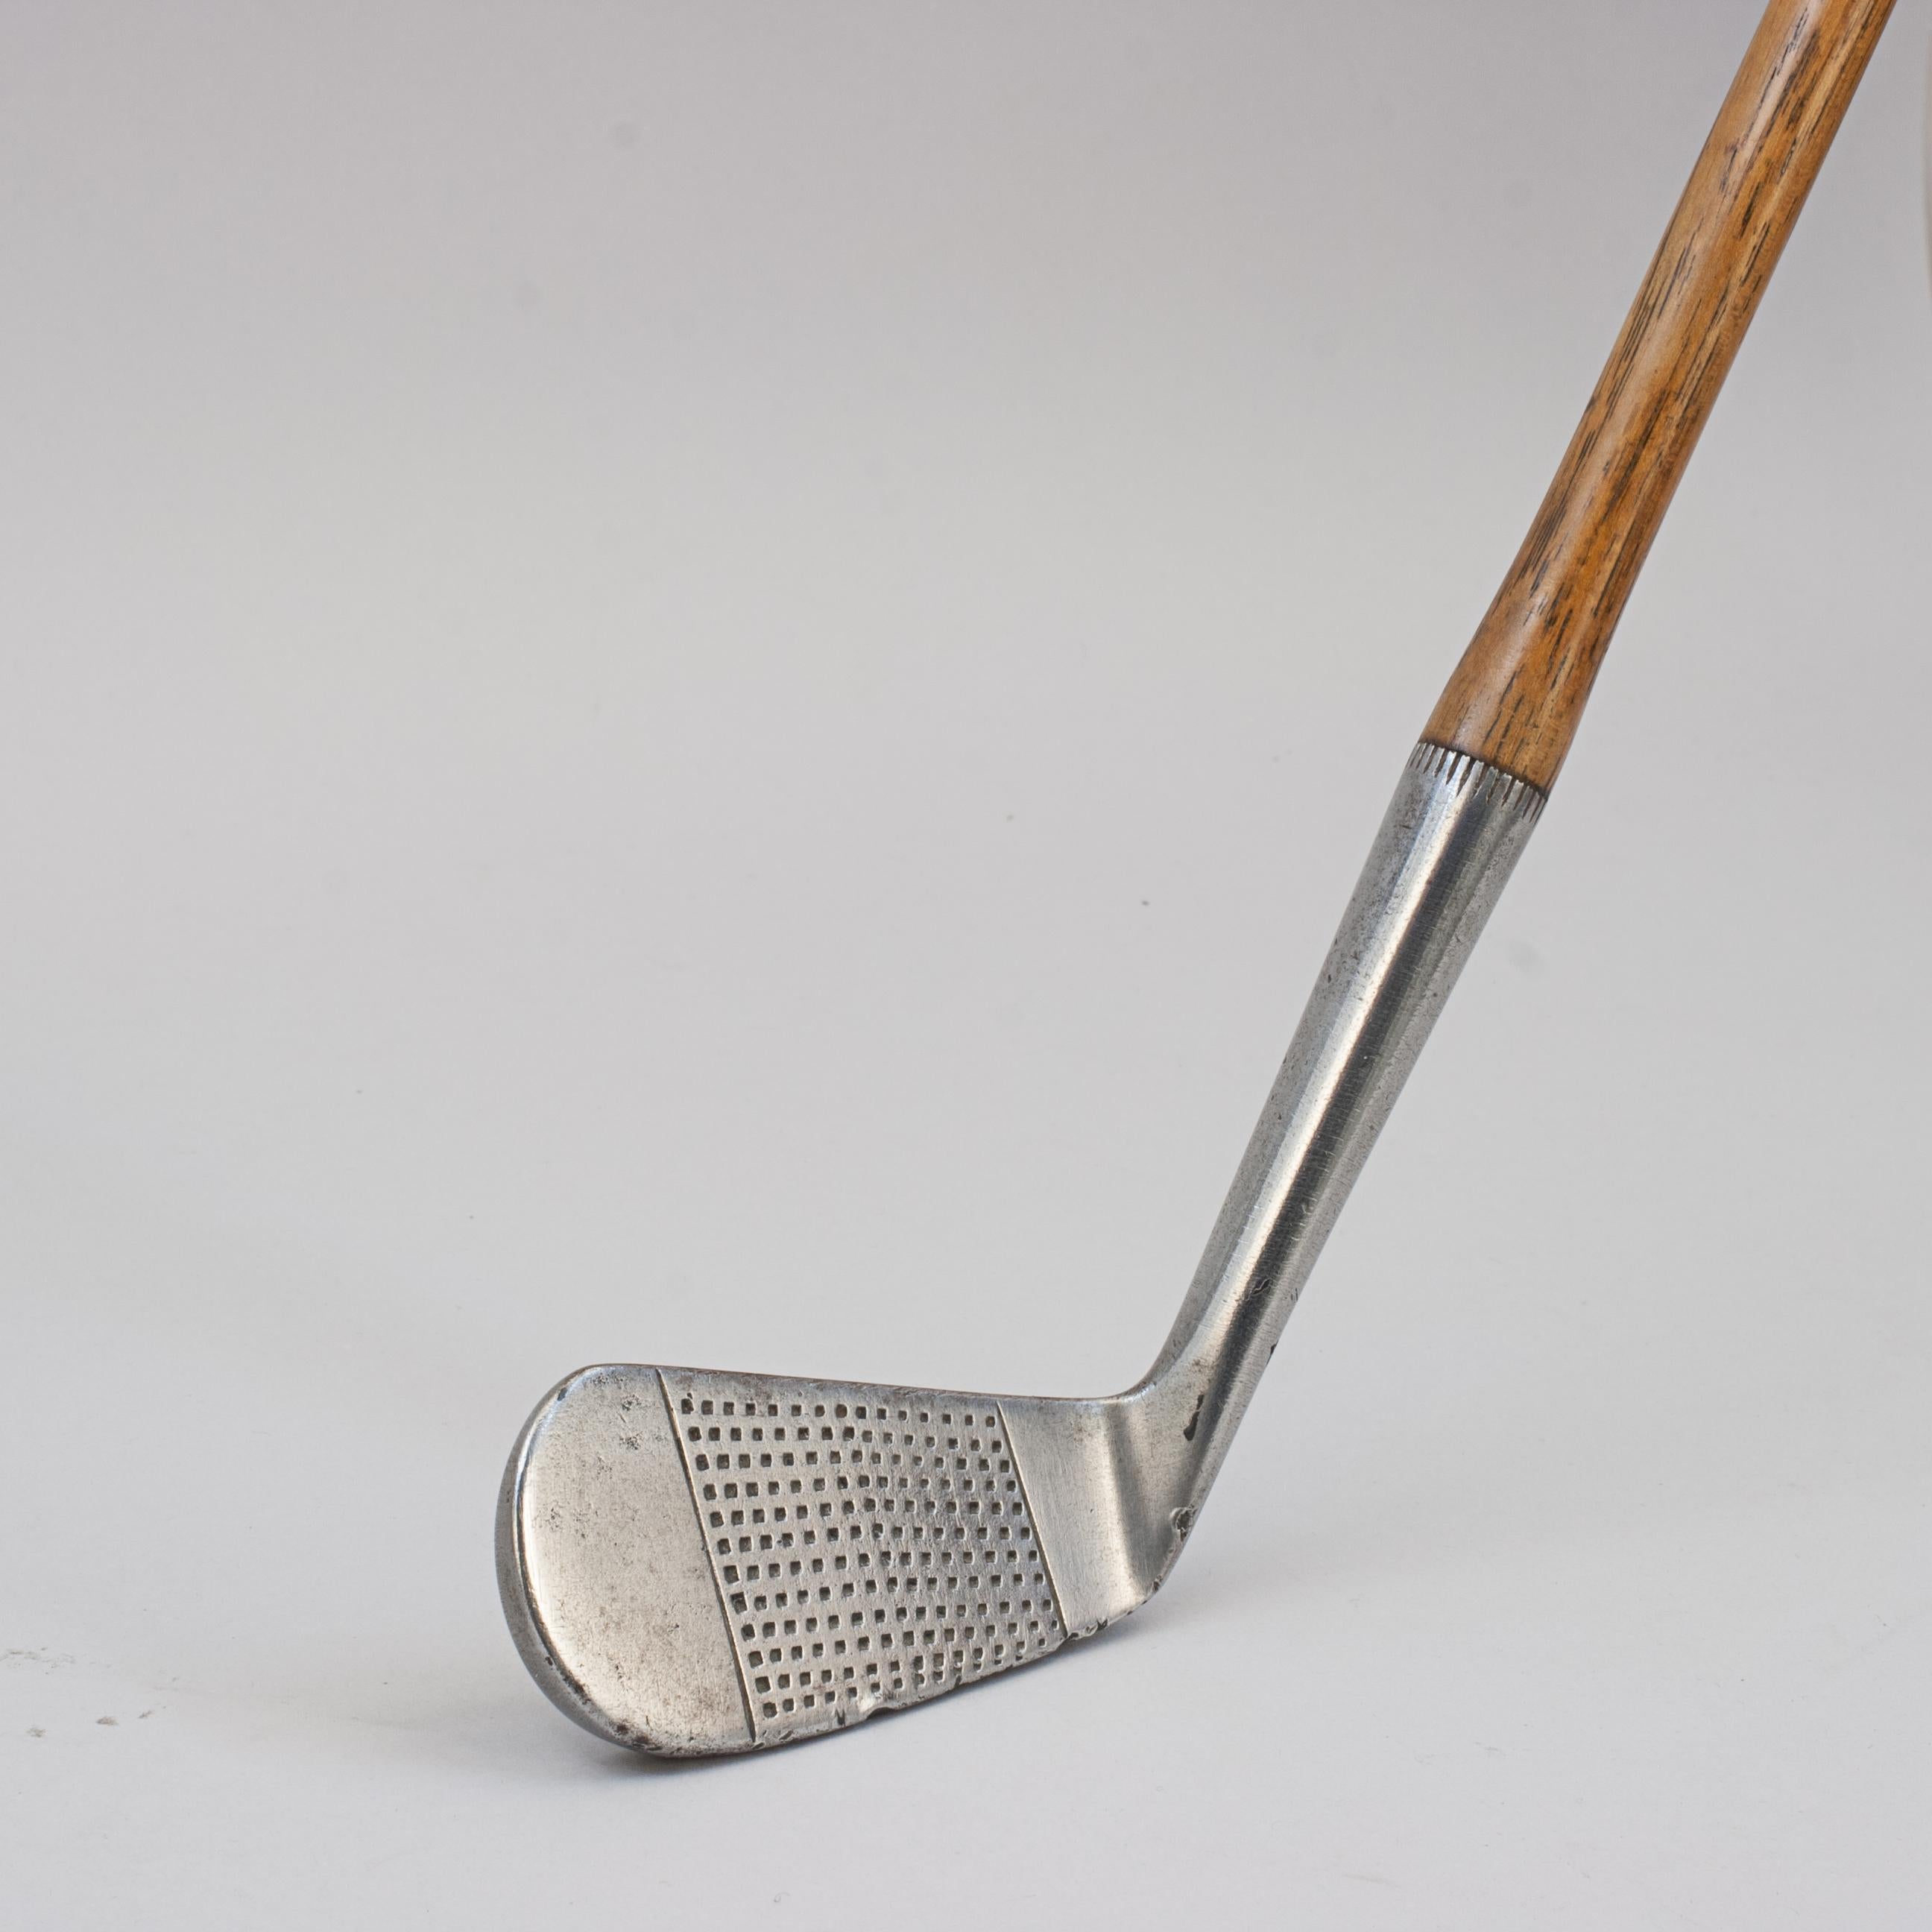 Vintage Hickory Golf Club, Iron, Cann & Taylor.
A nice original hickory blade iron with hand punched dot face markings. The hickory shaft with J. H. Taylor 